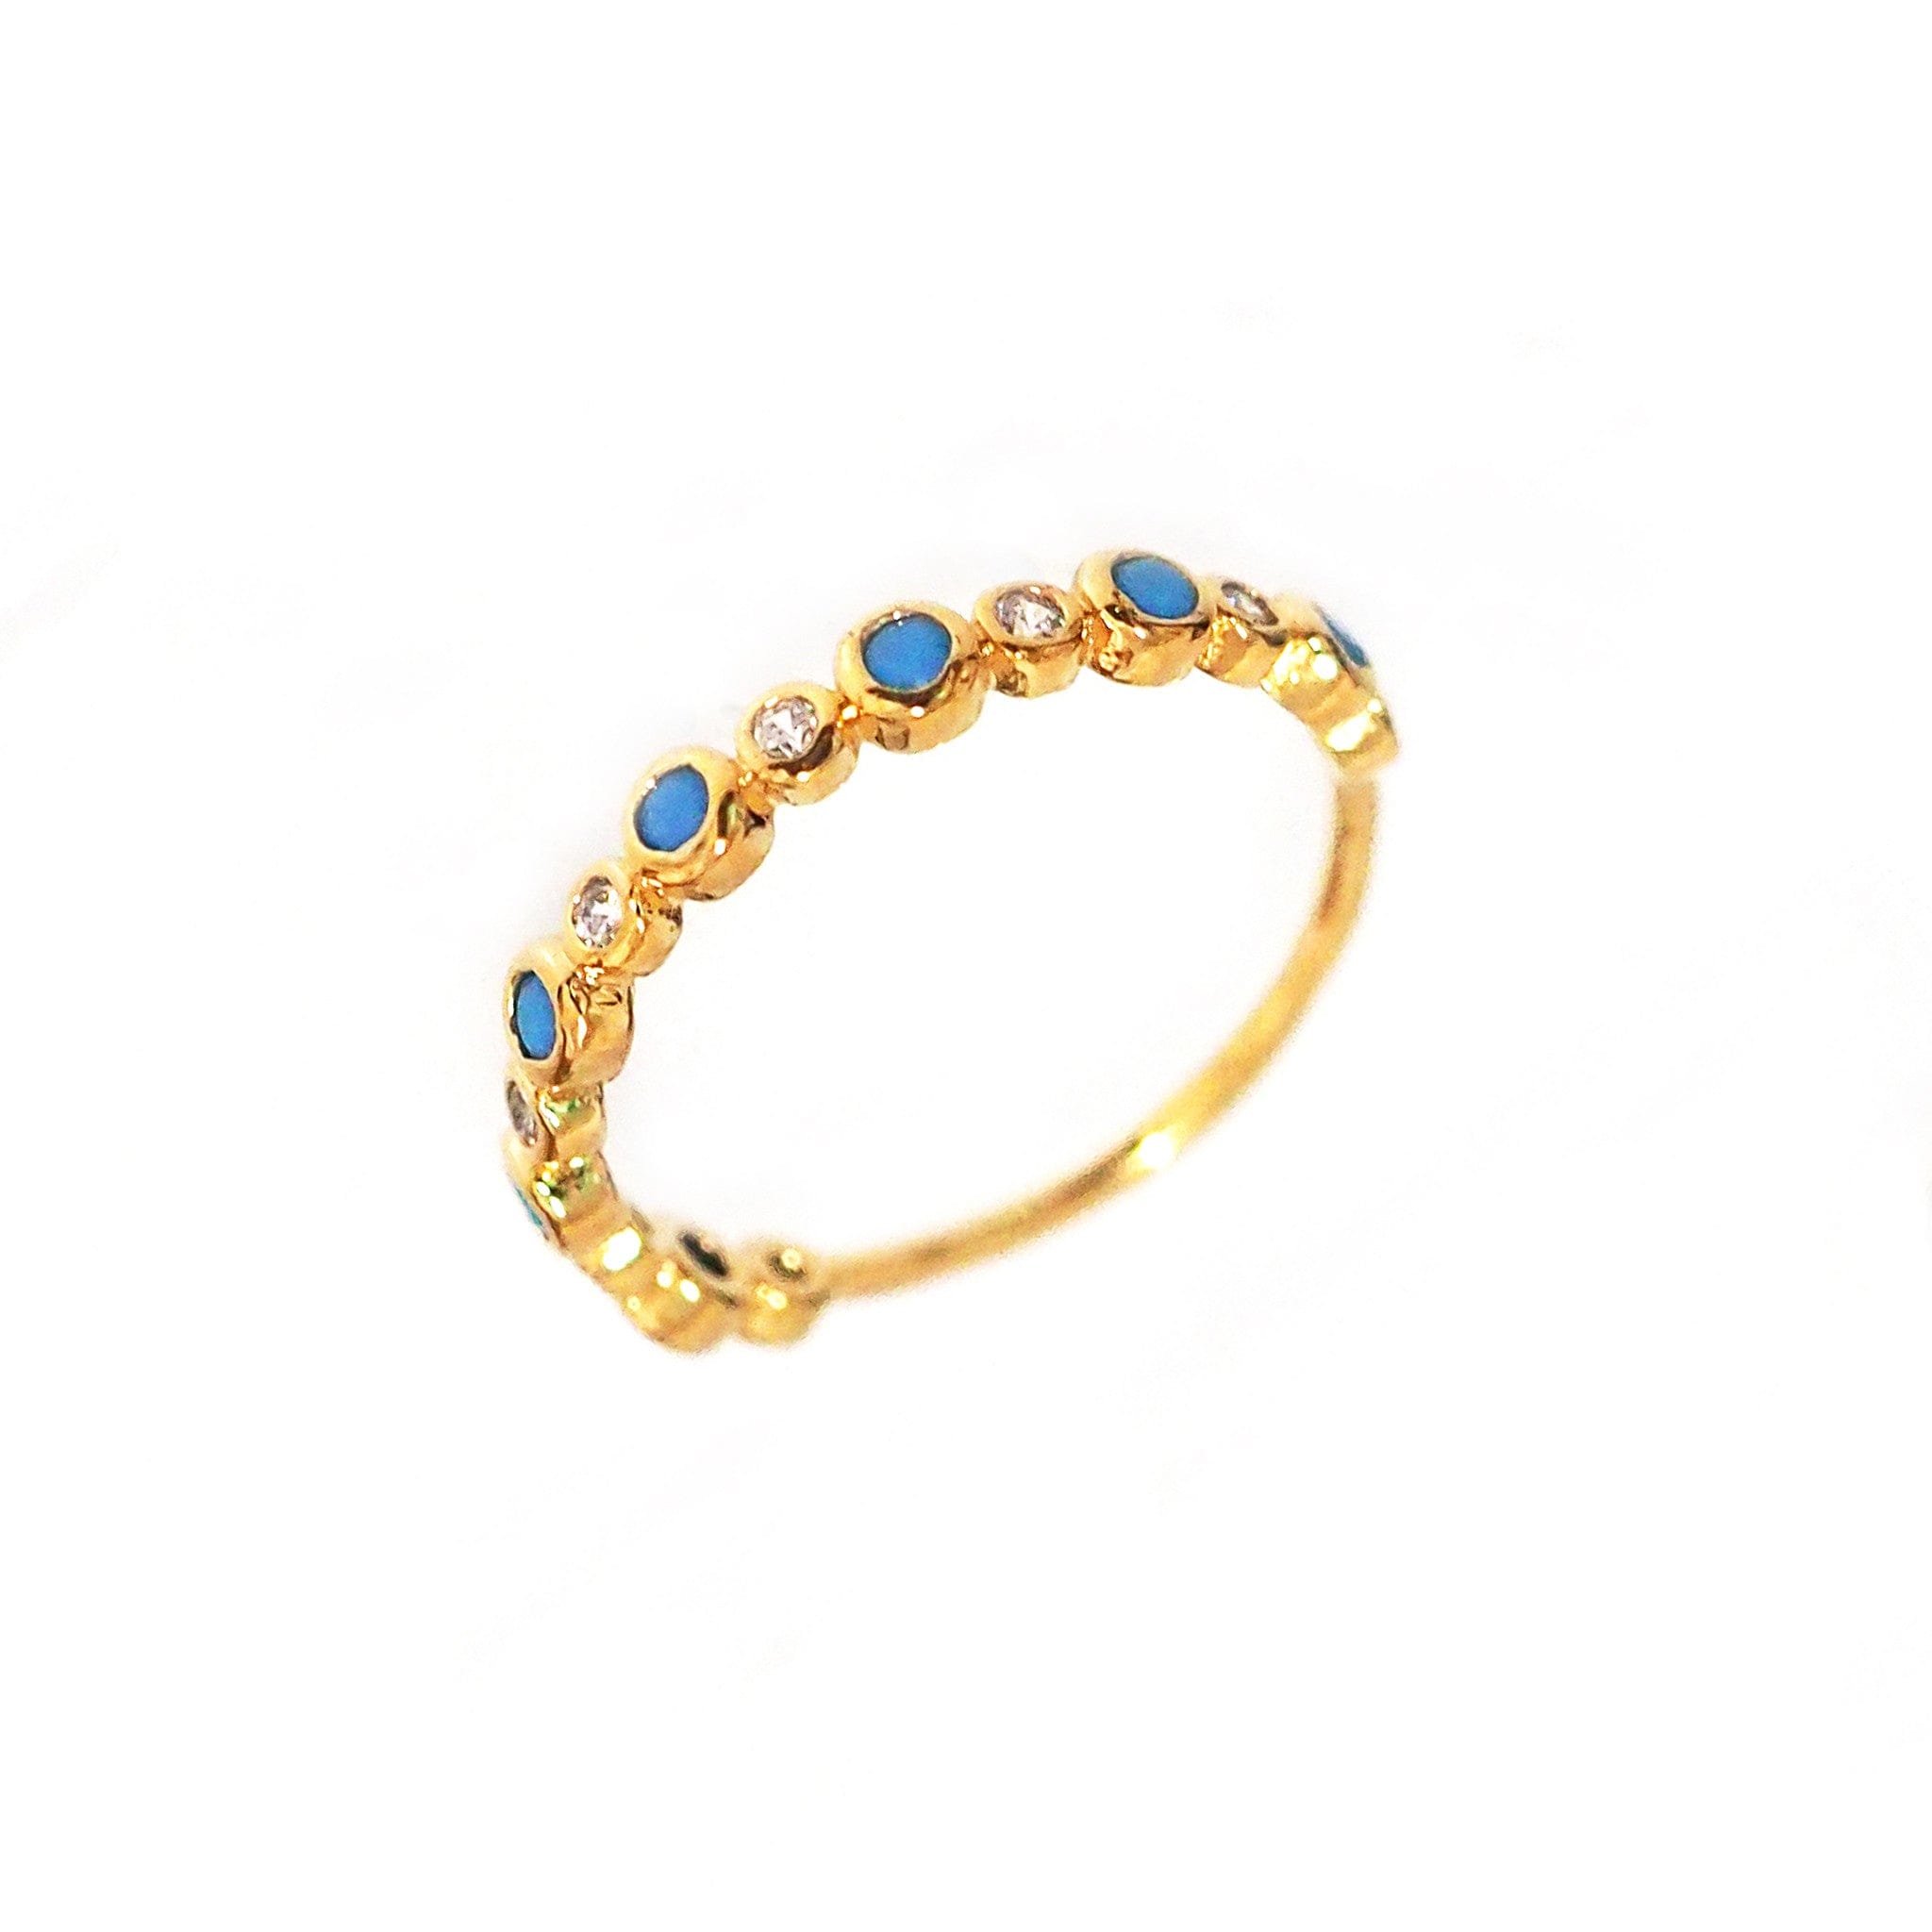 TAI JEWELRY Rings Gold Ring With Cz And Turquoise Bezel Set Stones